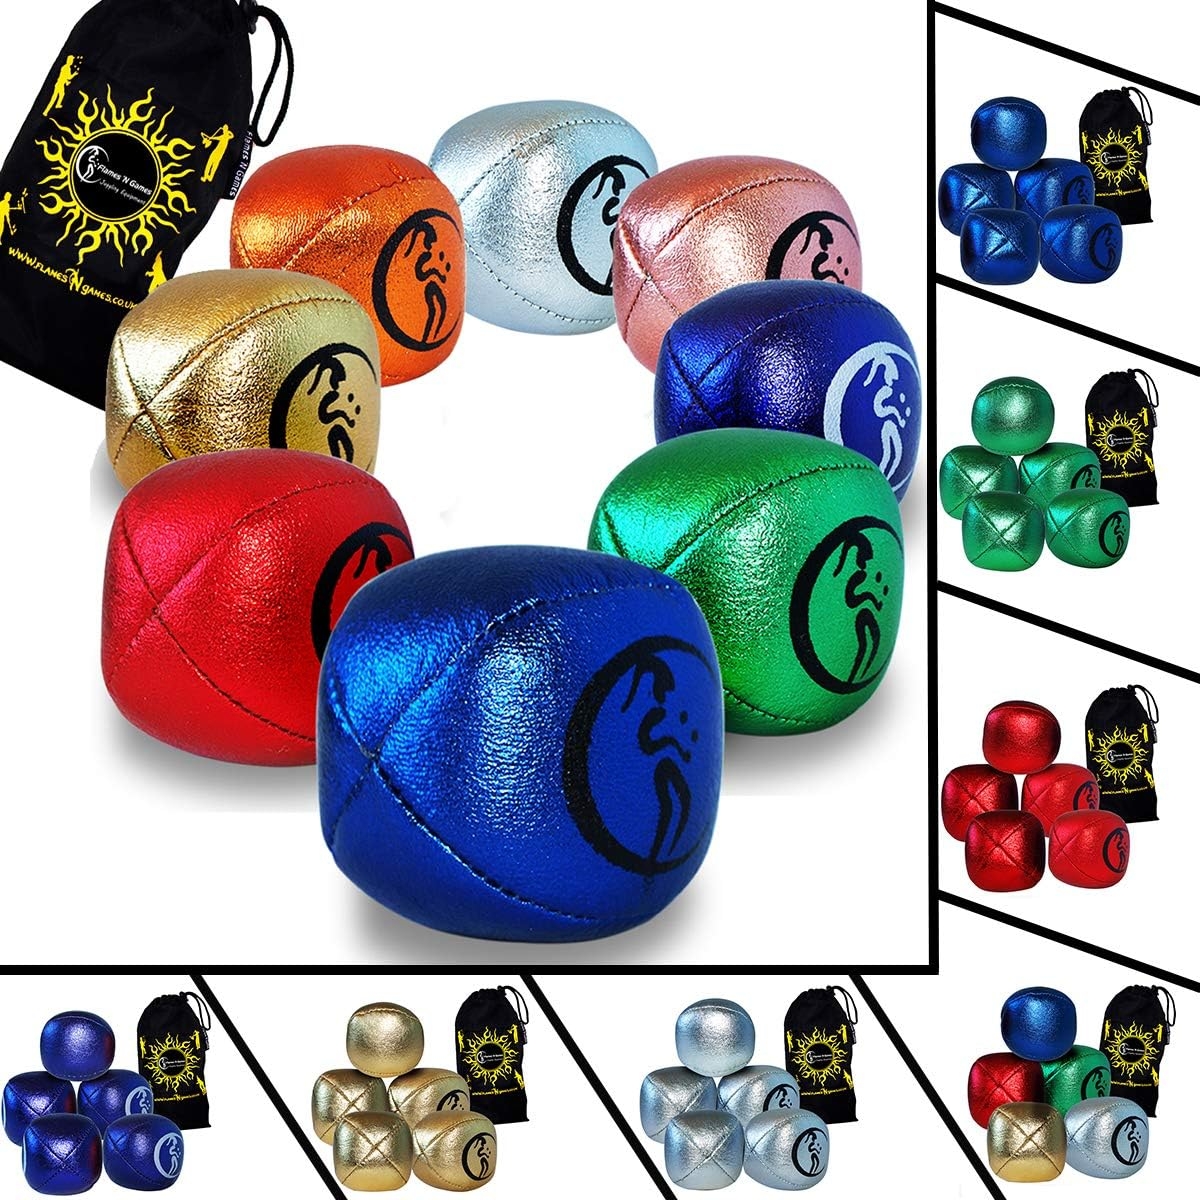 Flames 'N Games Metallic faux leather Juggling balls - 50% off - Seconds